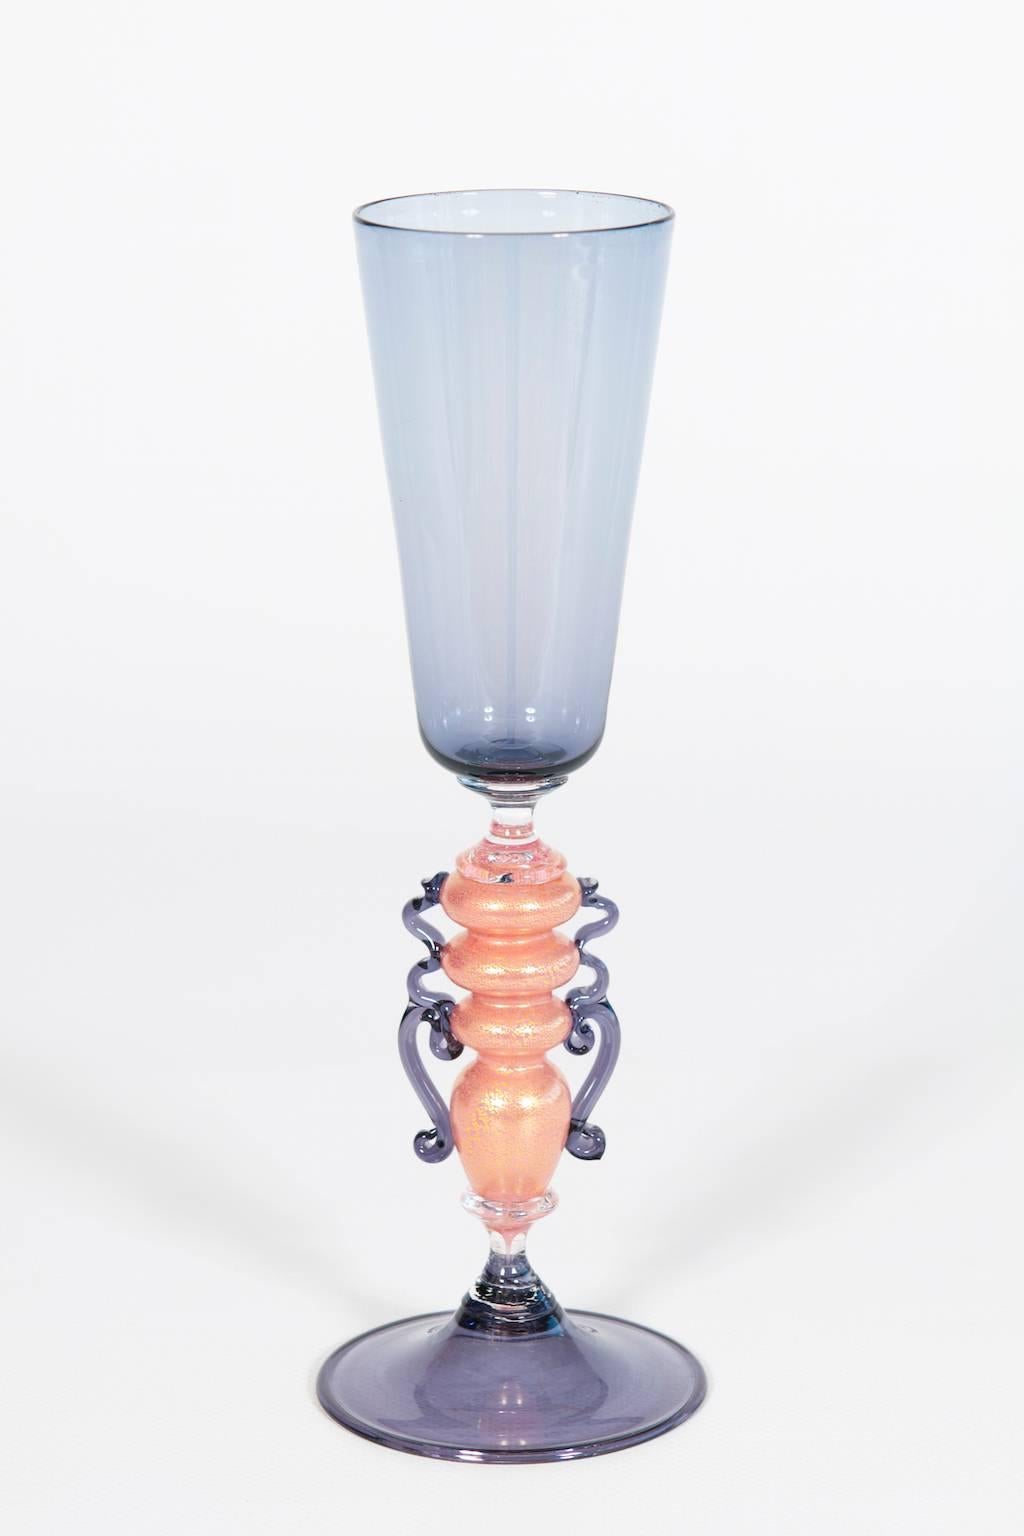 Handcrafted Murano glass Goblet 1970s light purple with accents of pink and gold.
This exquisite Italian Venetian goblet, meticulously handcrafted in Murano glass during the 1970s, features an elegant design, combining light purple with accents of